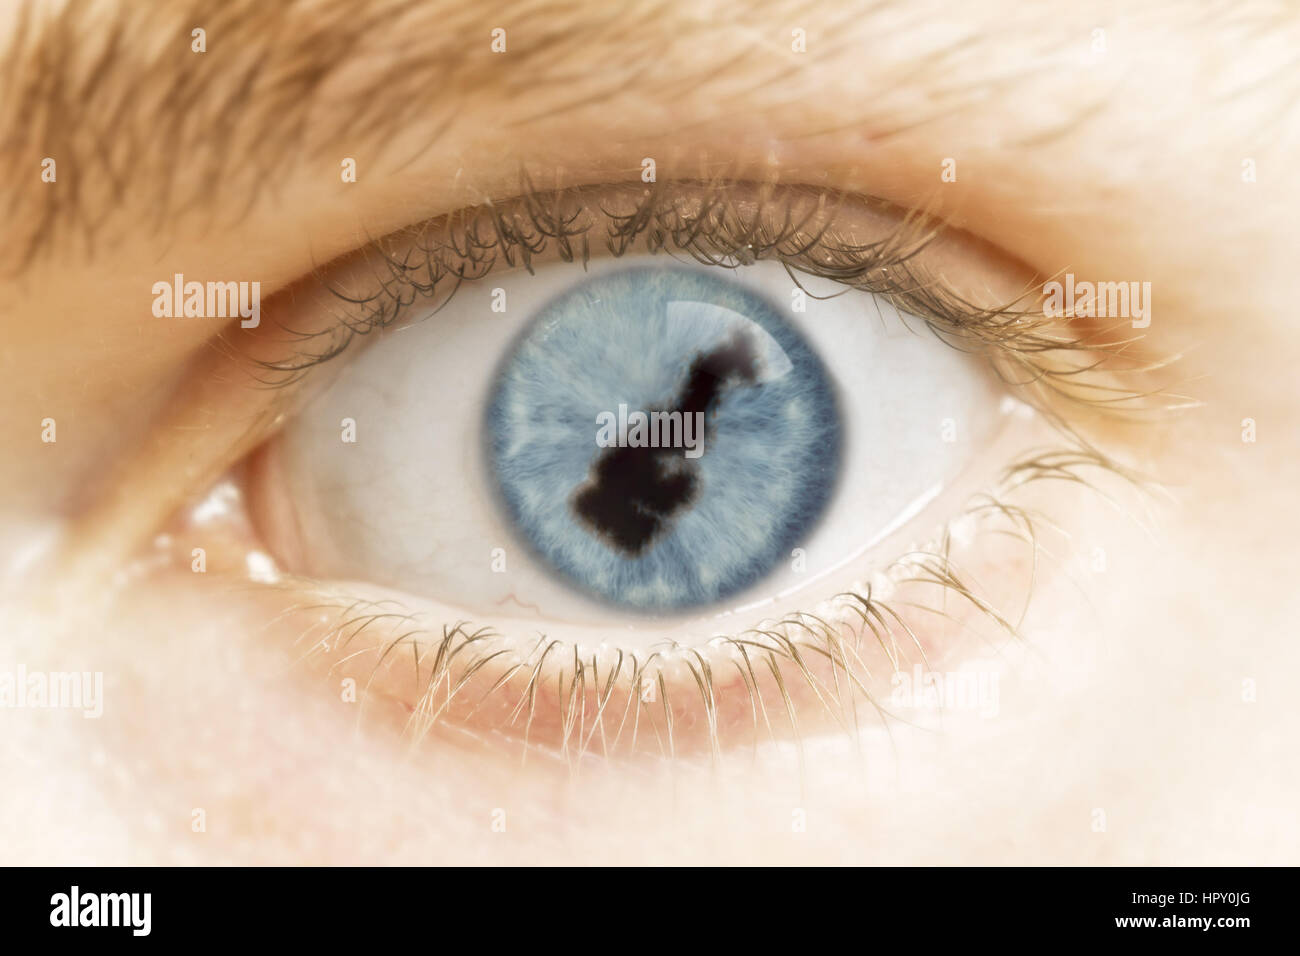 A close-up of an eye with the pupil in the shape of Monaco.(series) Stock Photo